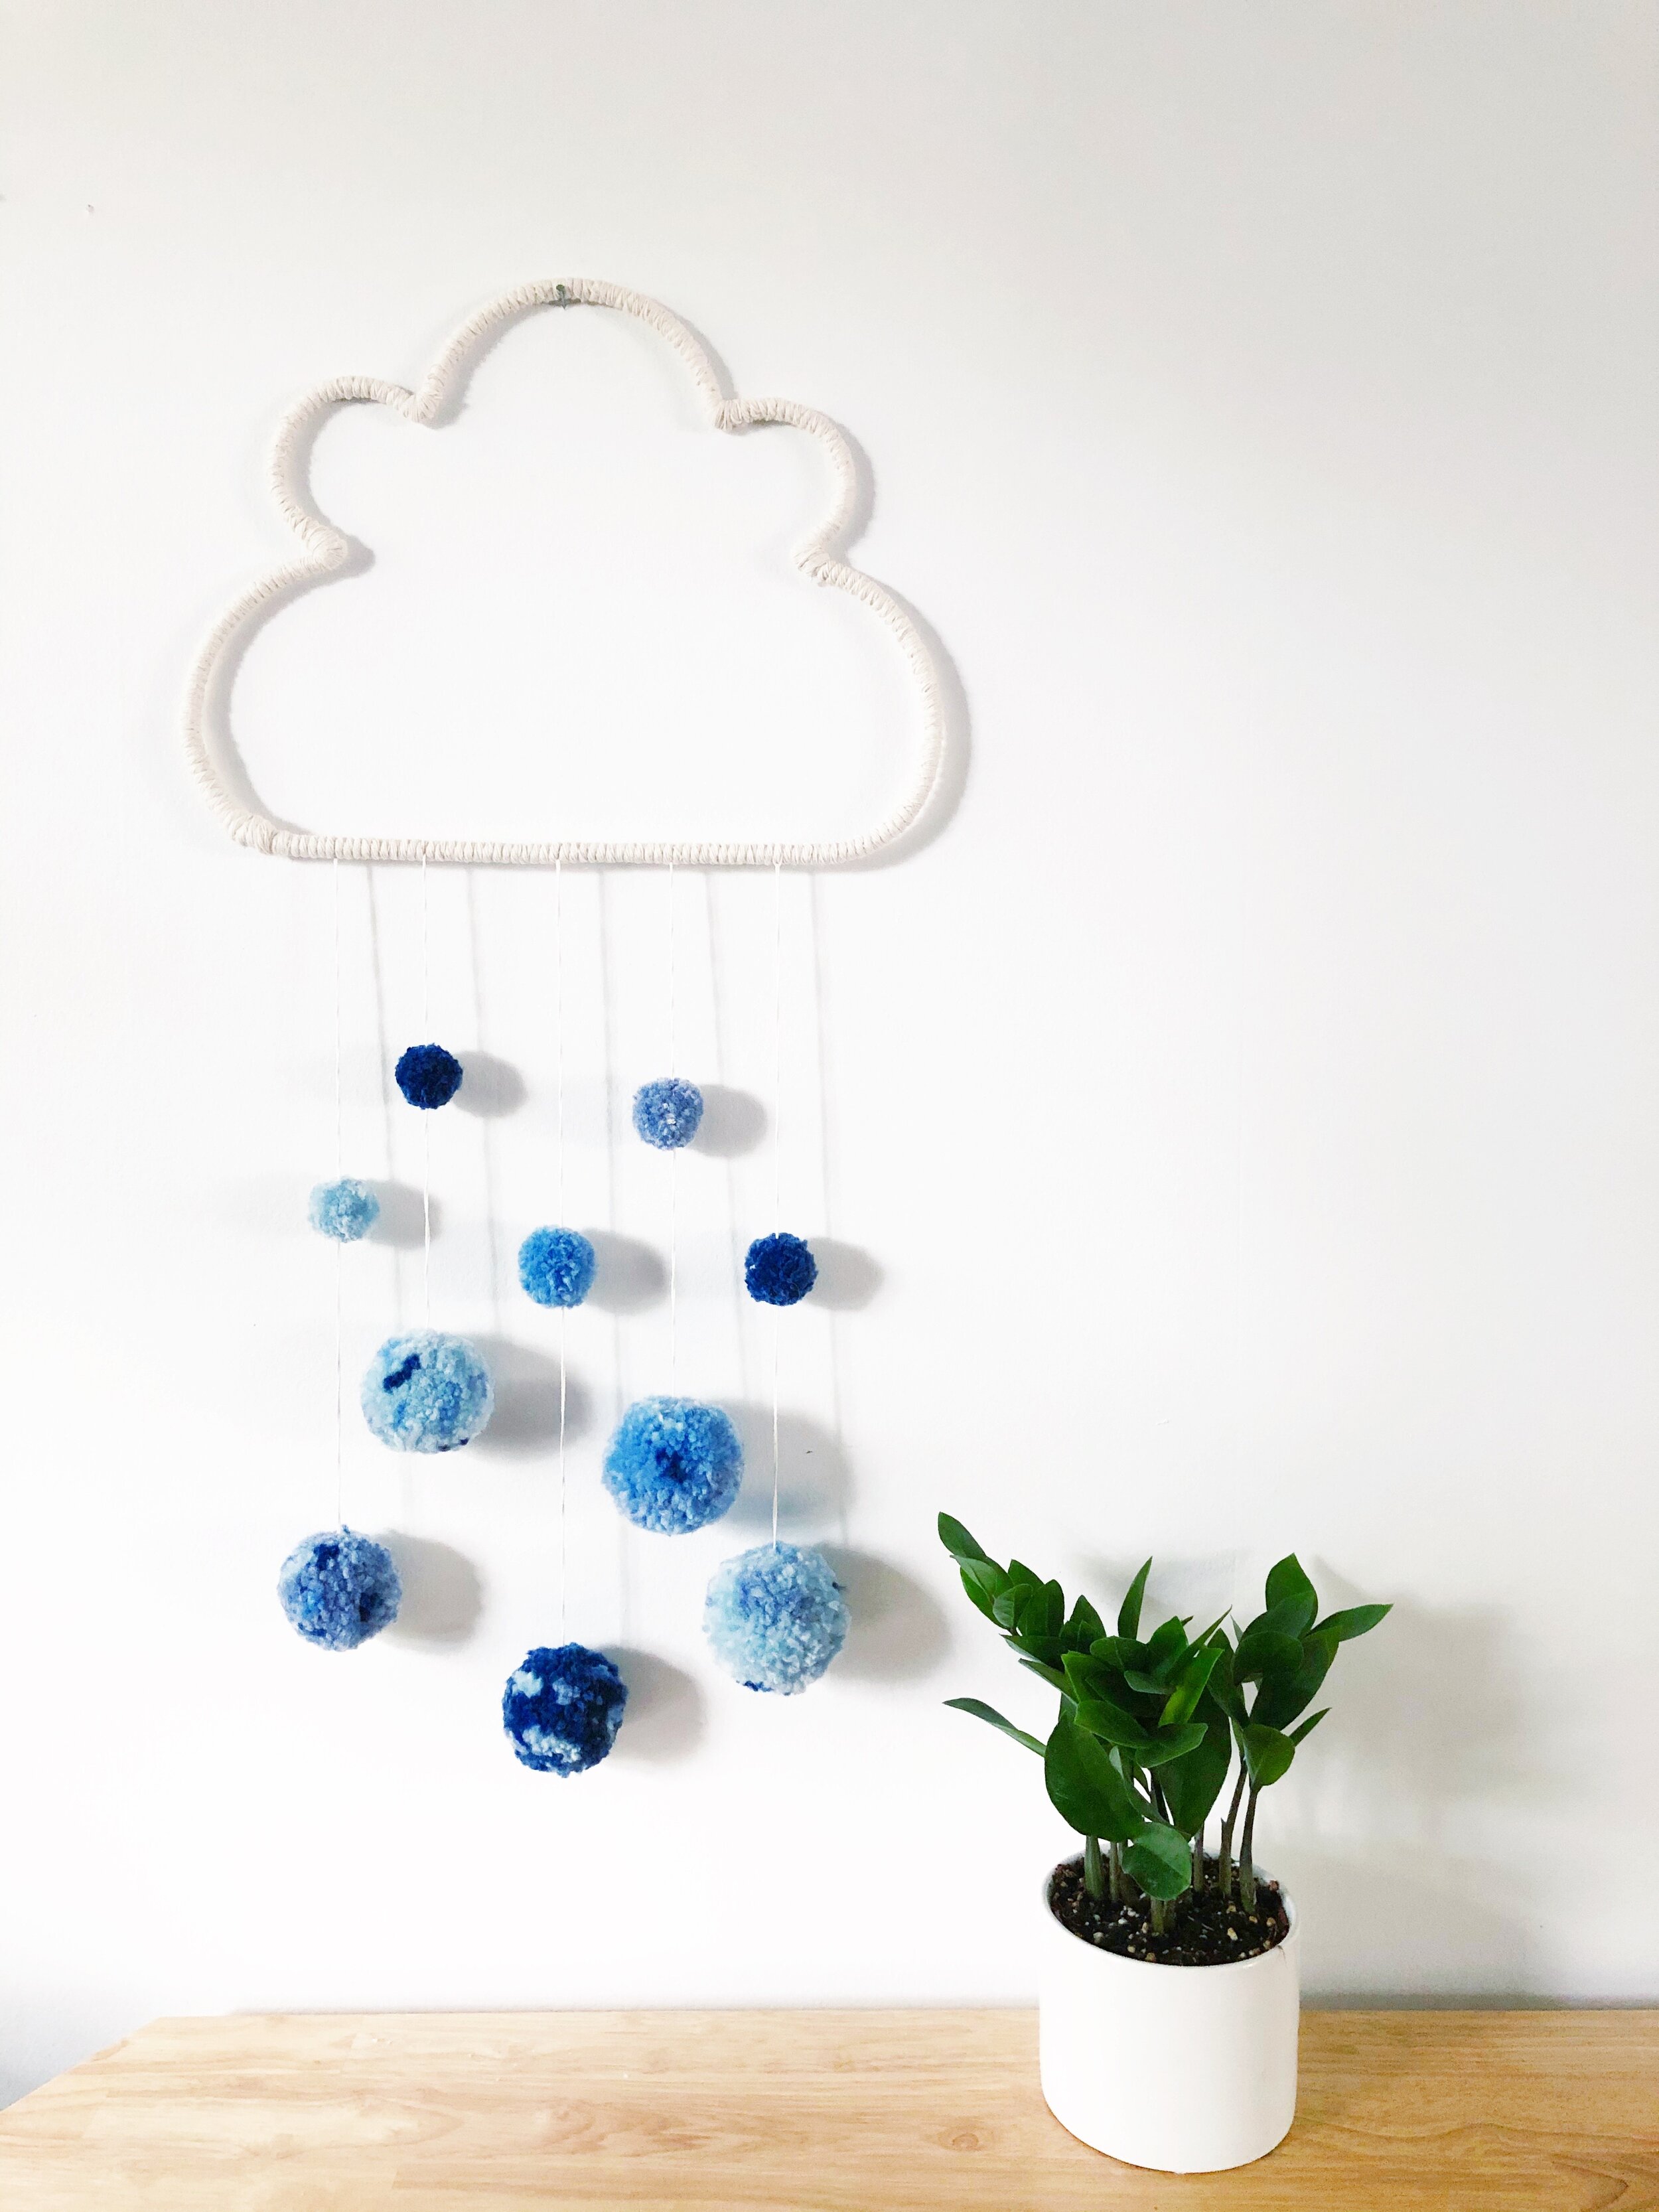 DIY Cloud Wall Hanging, a Step-by-Step Beginner's — KAYMA CO